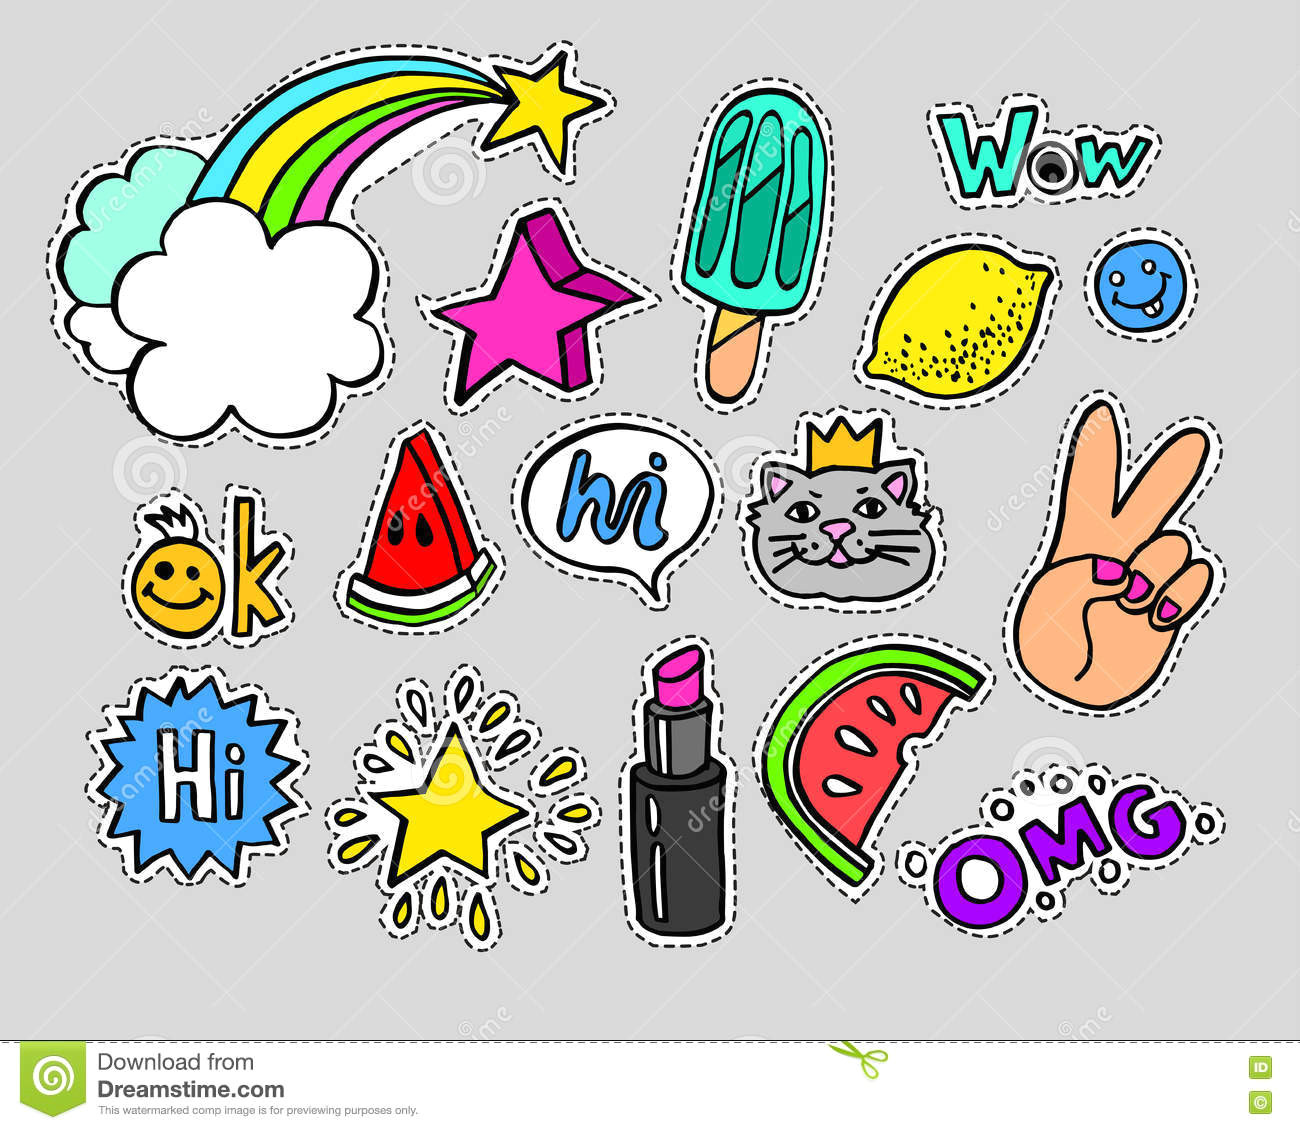 fashion modern doodle cartoon patch badges or stikers with speach bubbles stars heart lips and other elements set of cartoon pins in 80s 90s pop art